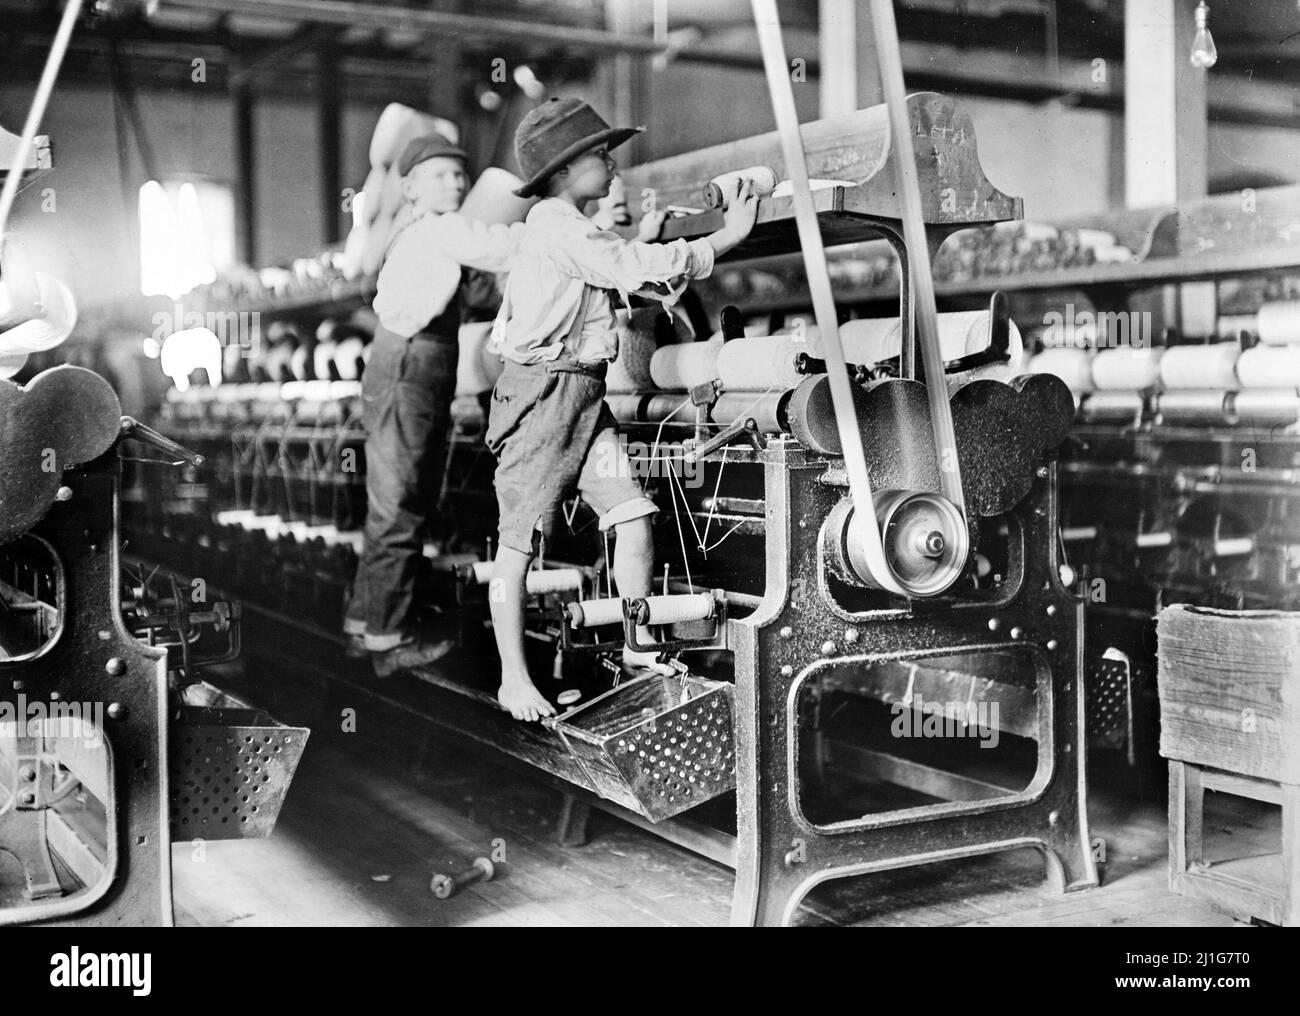 Doffer Boys, Macon, Georgia by Lewis Hine (1874-1940), 1908. The photograph shows young boys working in a cotton mill as child labor Stock Photo